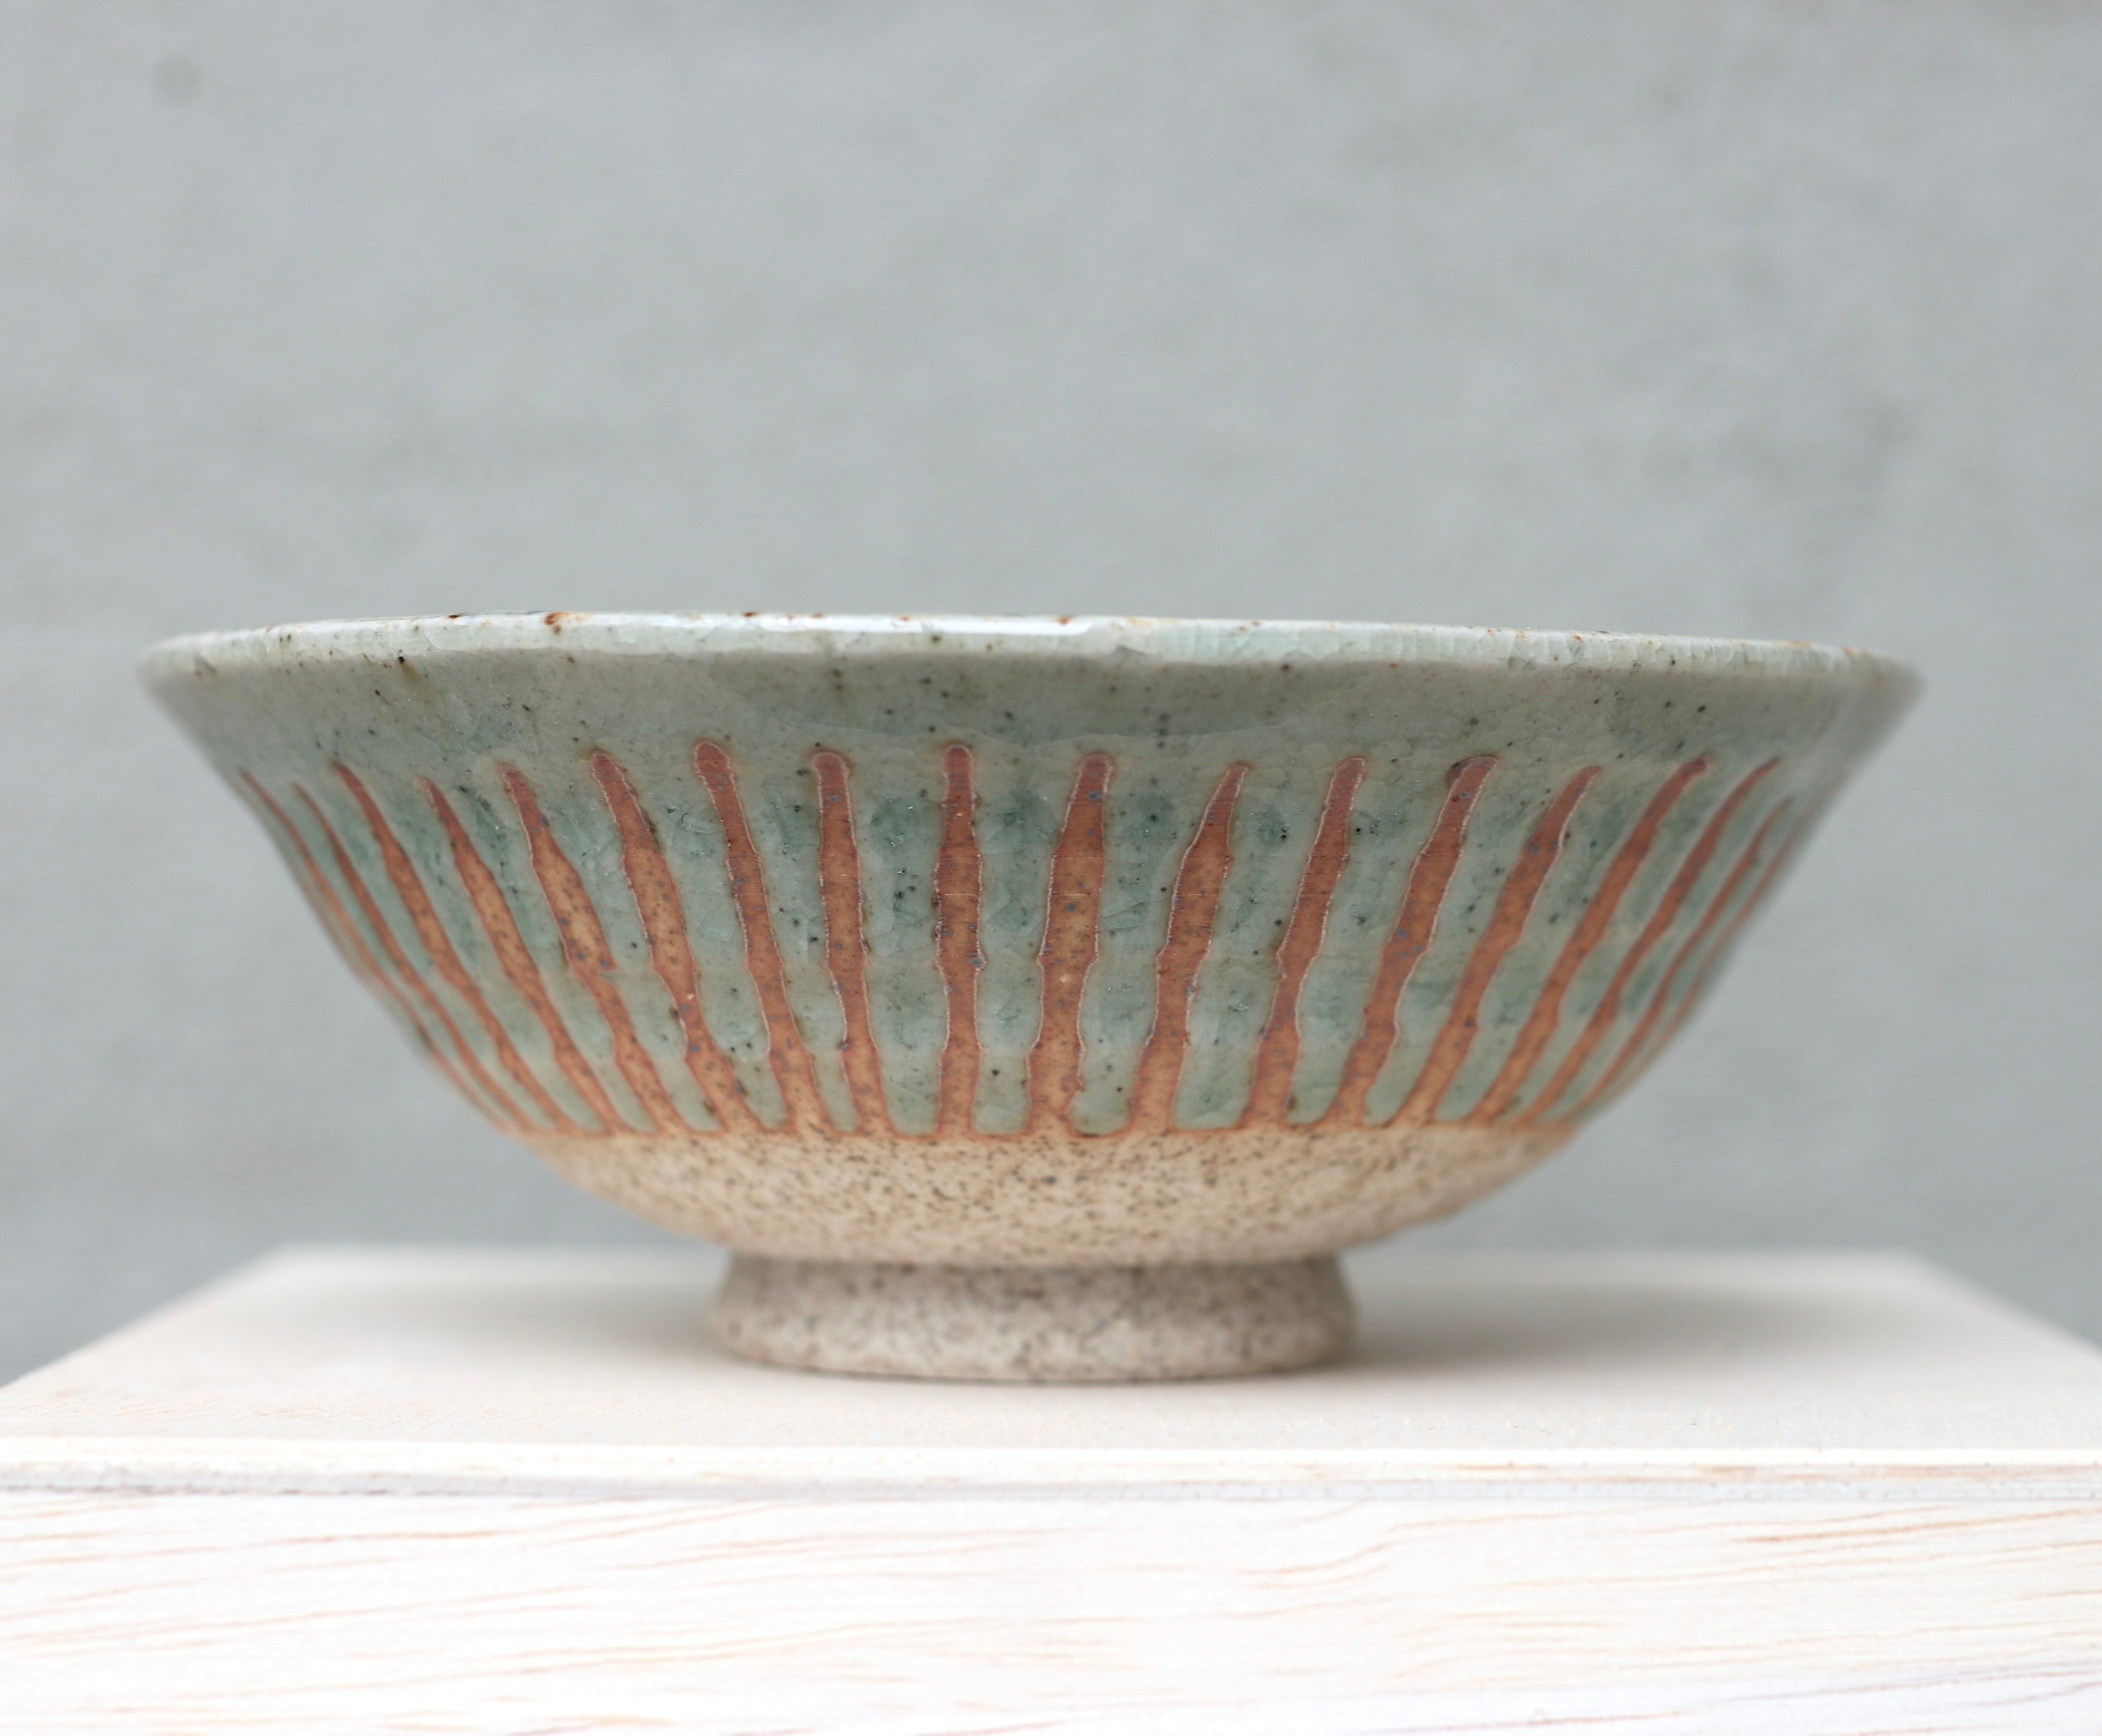 Green-blue ceramic bowl with brownish stripes